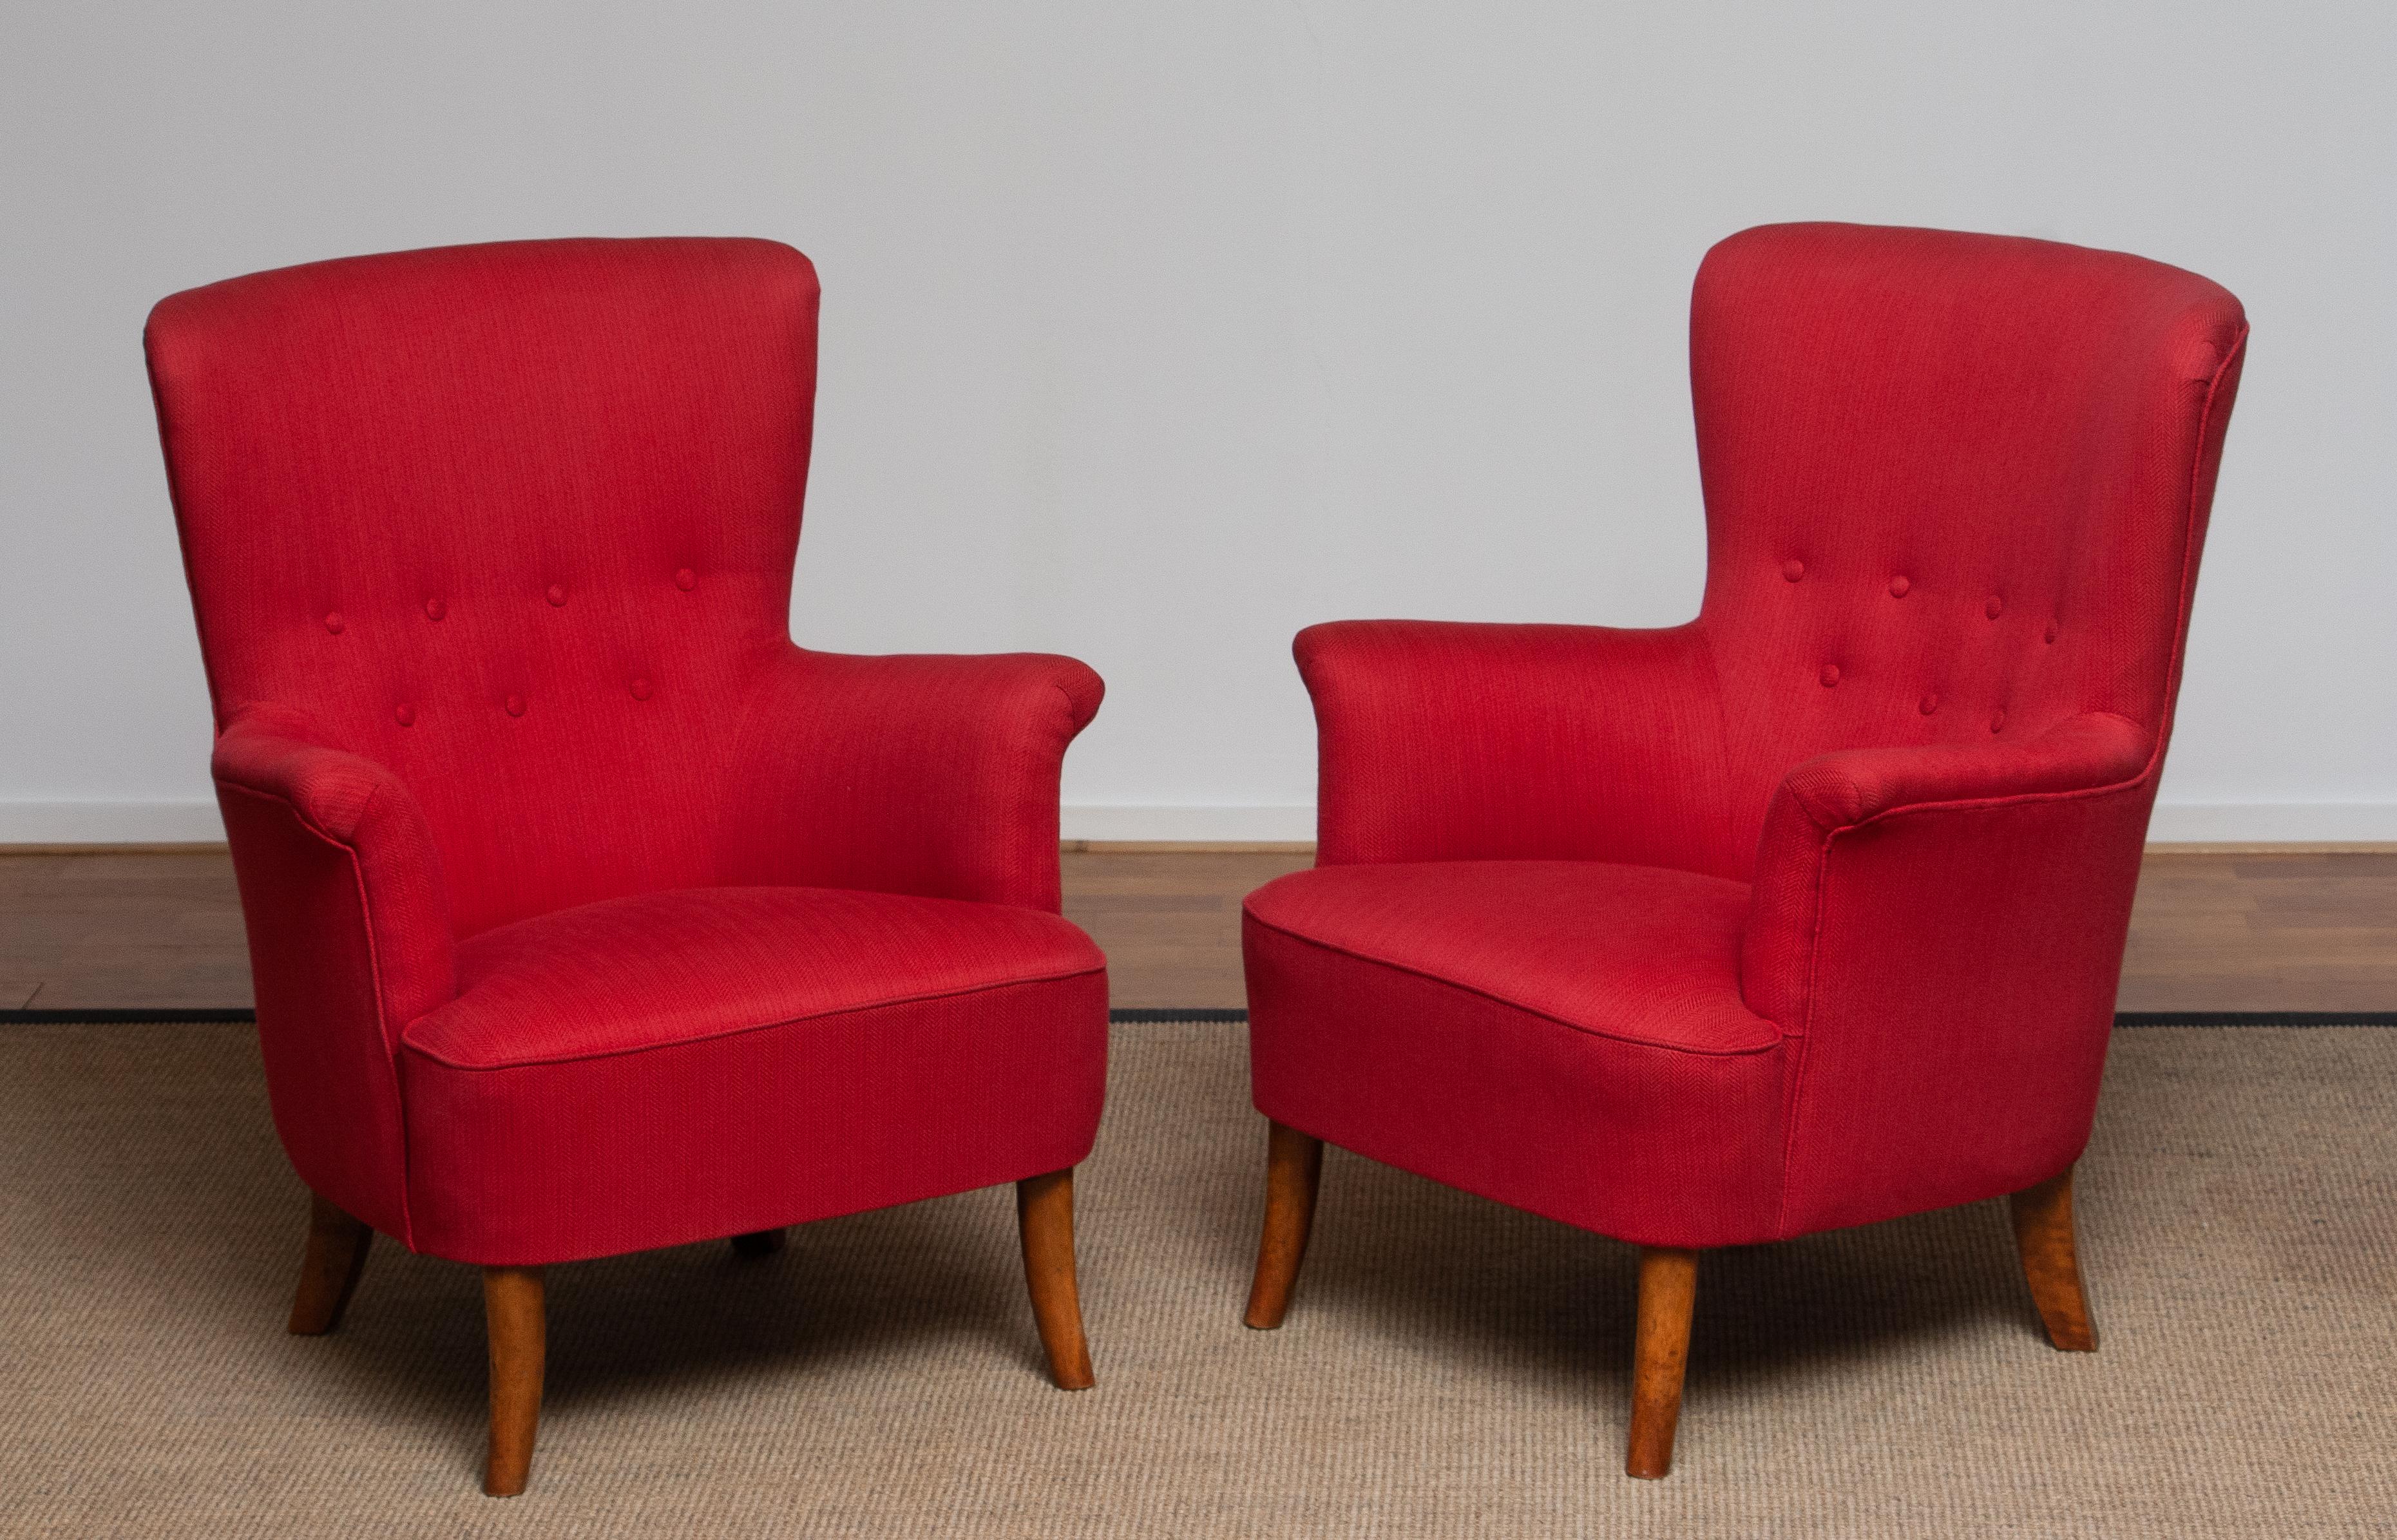 Mid-20th Century 1940s, Pair of Fuchsia Easy or Lounge Chair by Carl Malmsten for Oh Sjögren